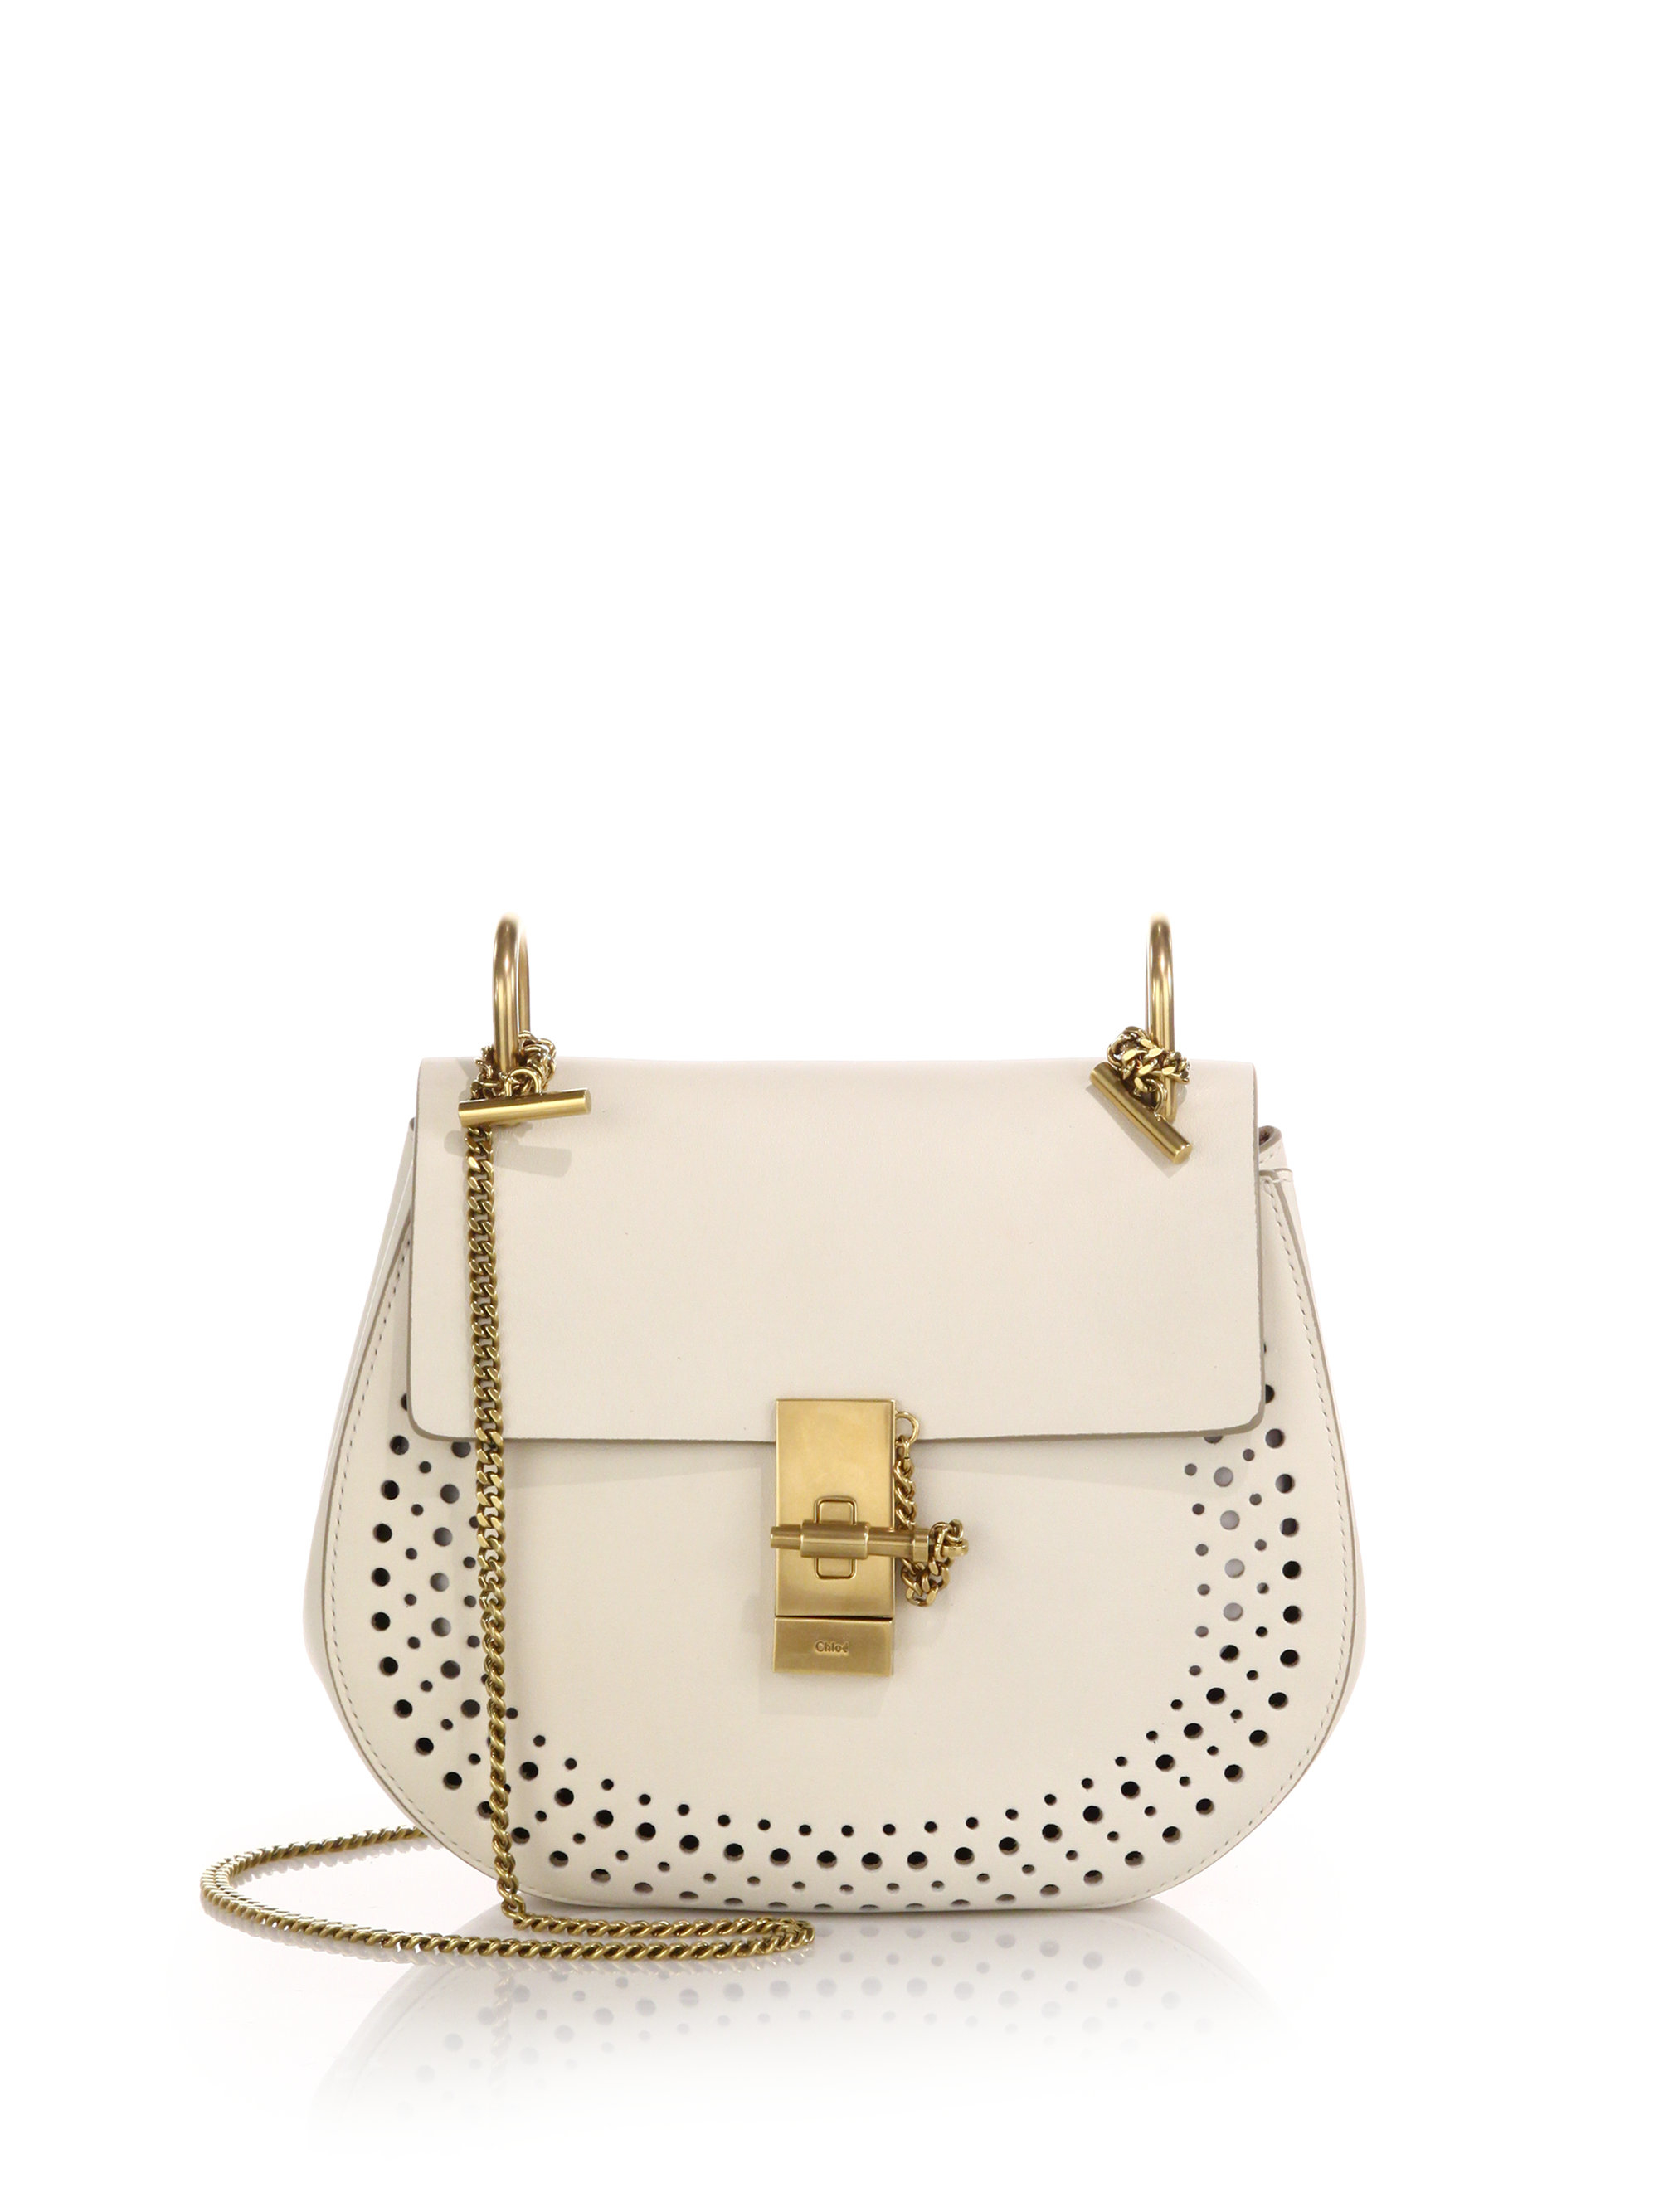 chloe bag - Chlo Drew Small Perforated Leather Shoulder Bag in Beige (lace ...